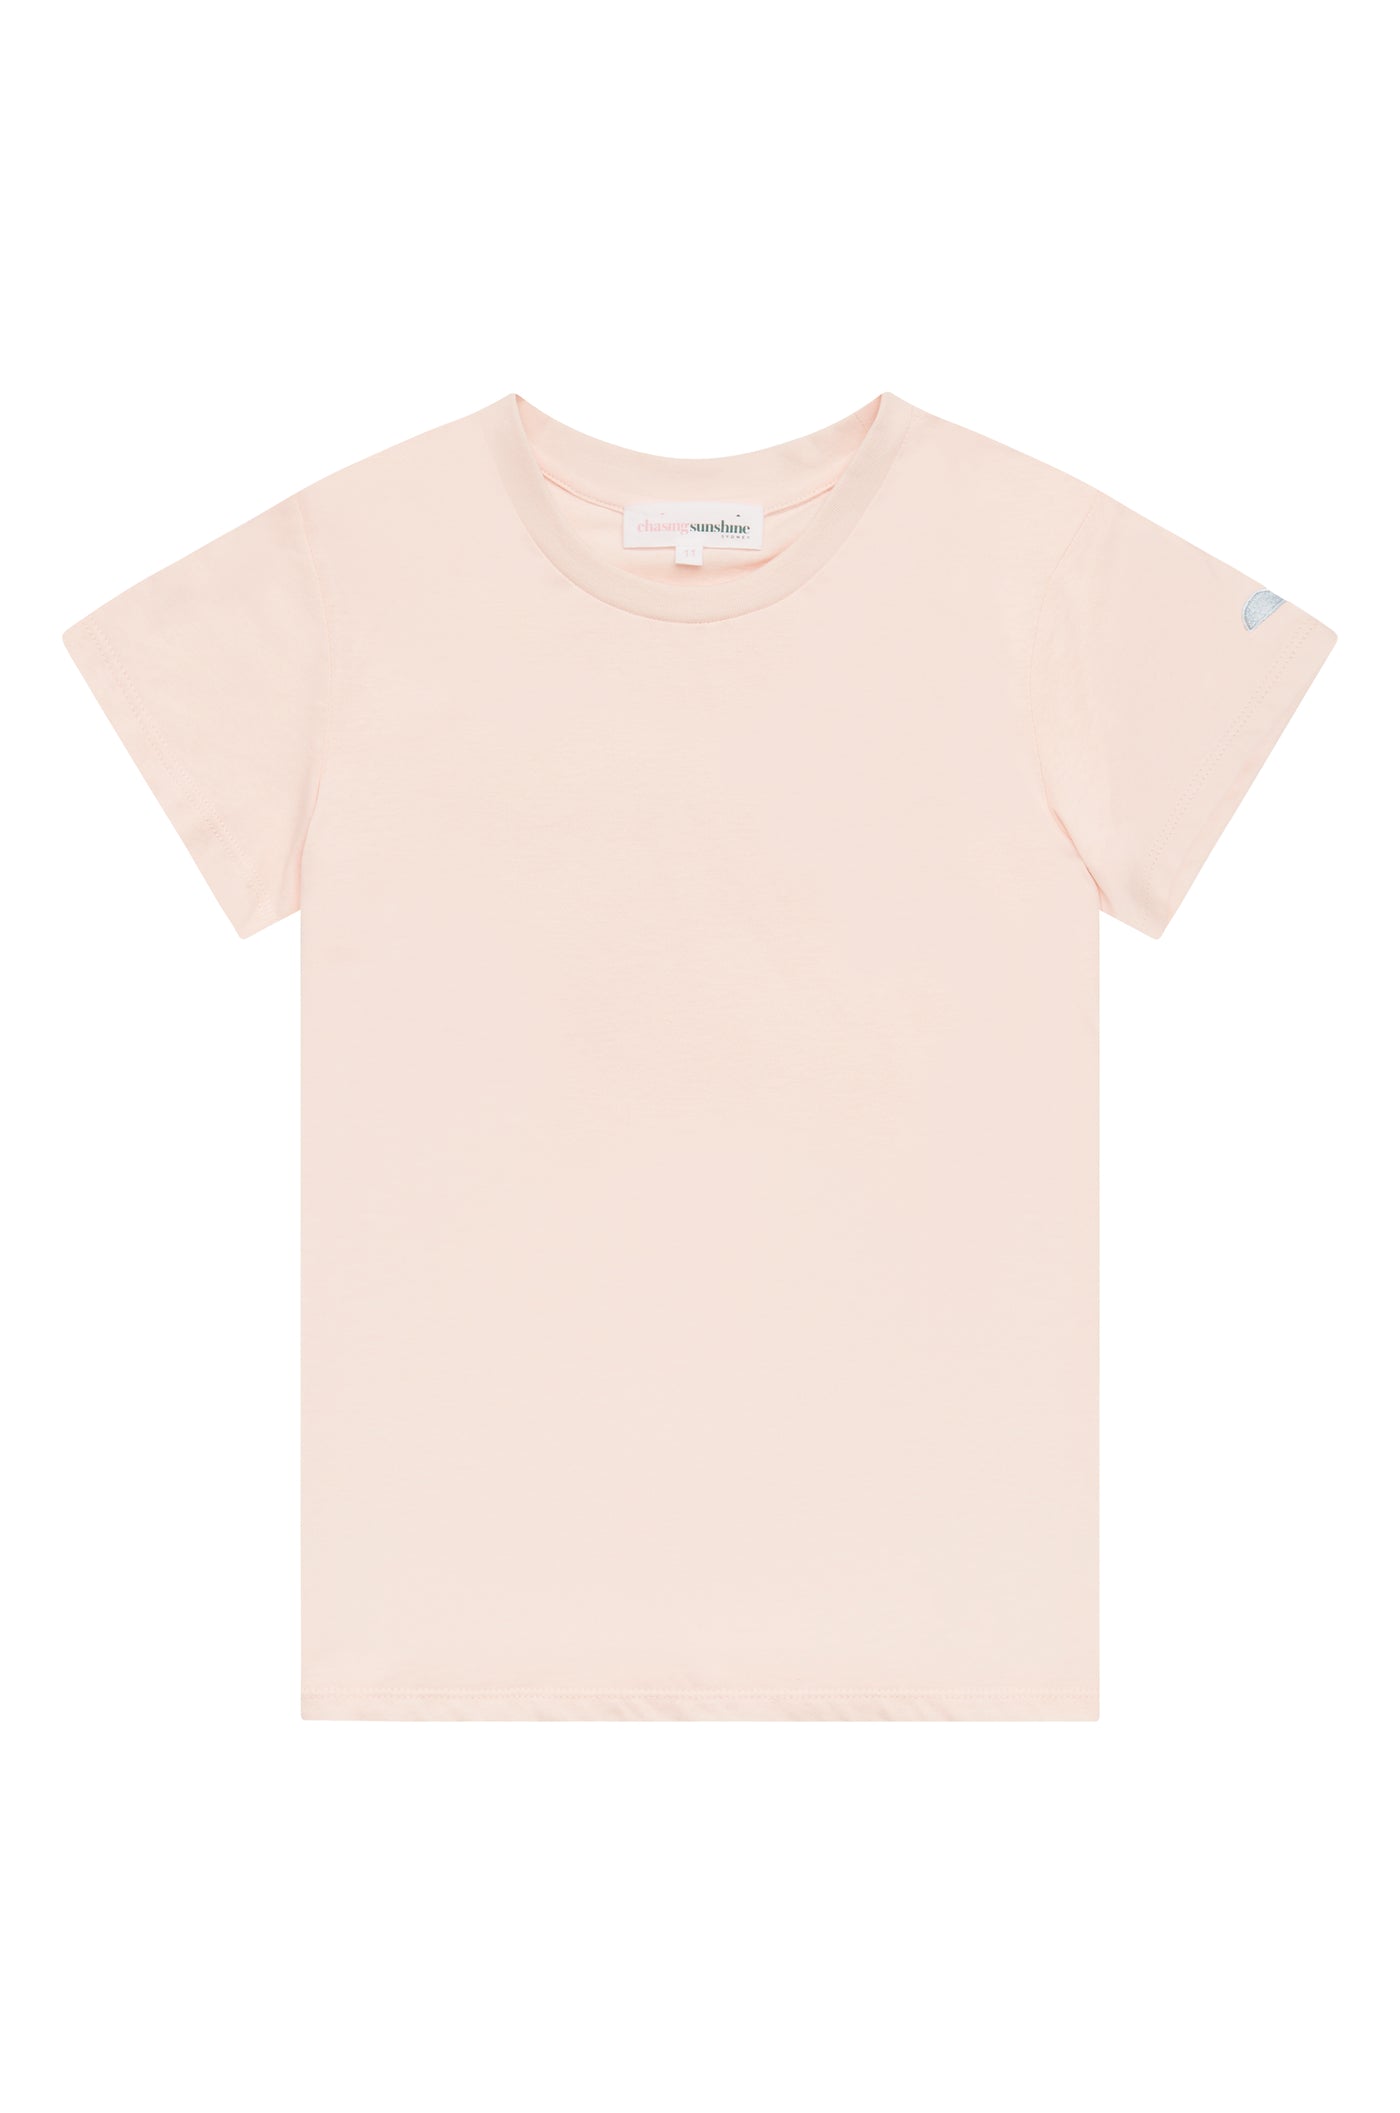 THE CLASSIC TEE IN BALLET PINK